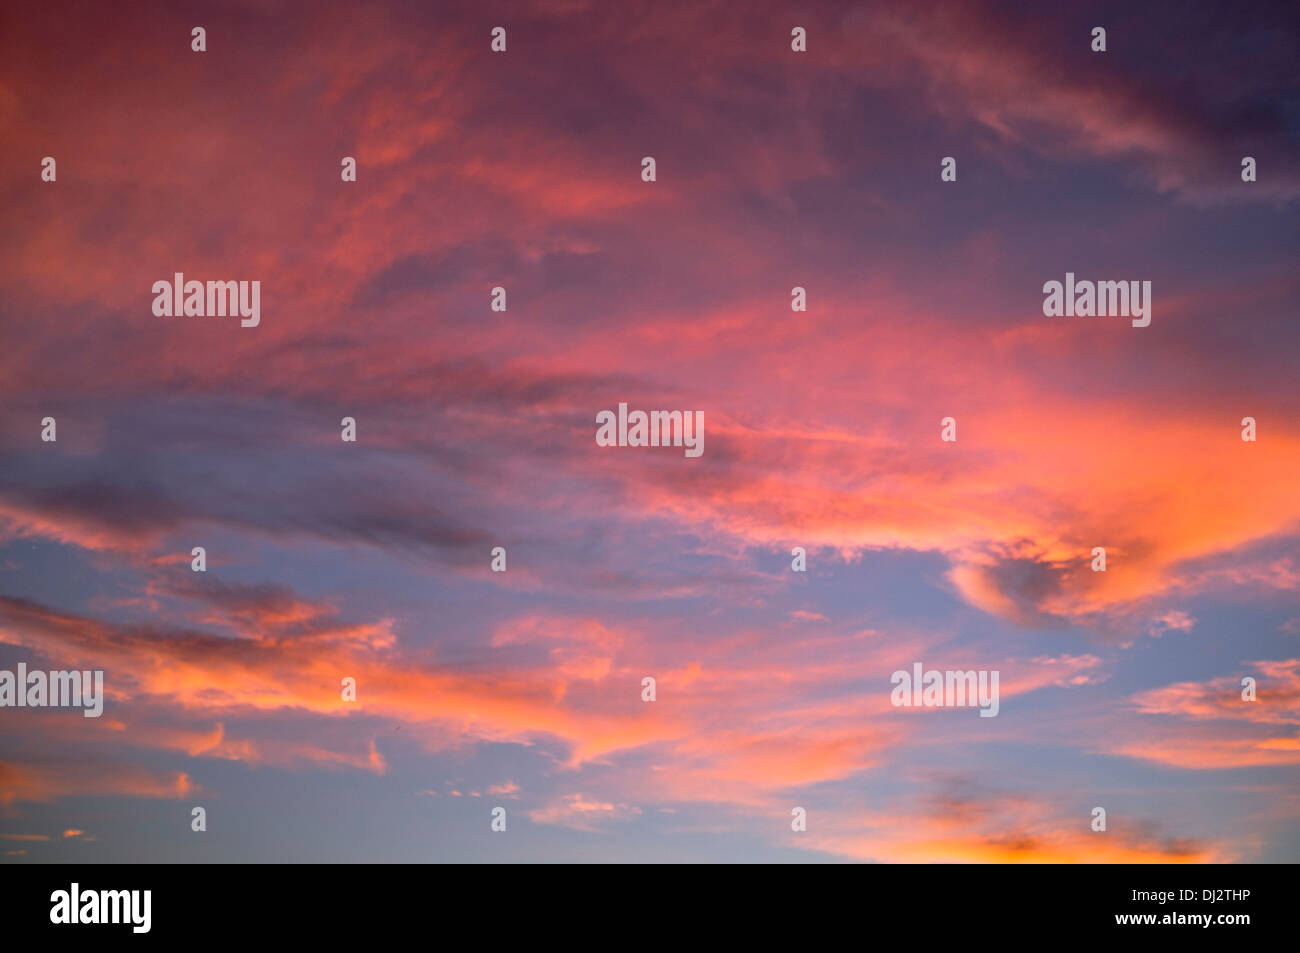 dh Sunset SKY WEATHER Red cloud sunset blue sky over Lanzarote dusk clouds sun set dramatic islands orange cloudscape clear background canary island Stock Photo